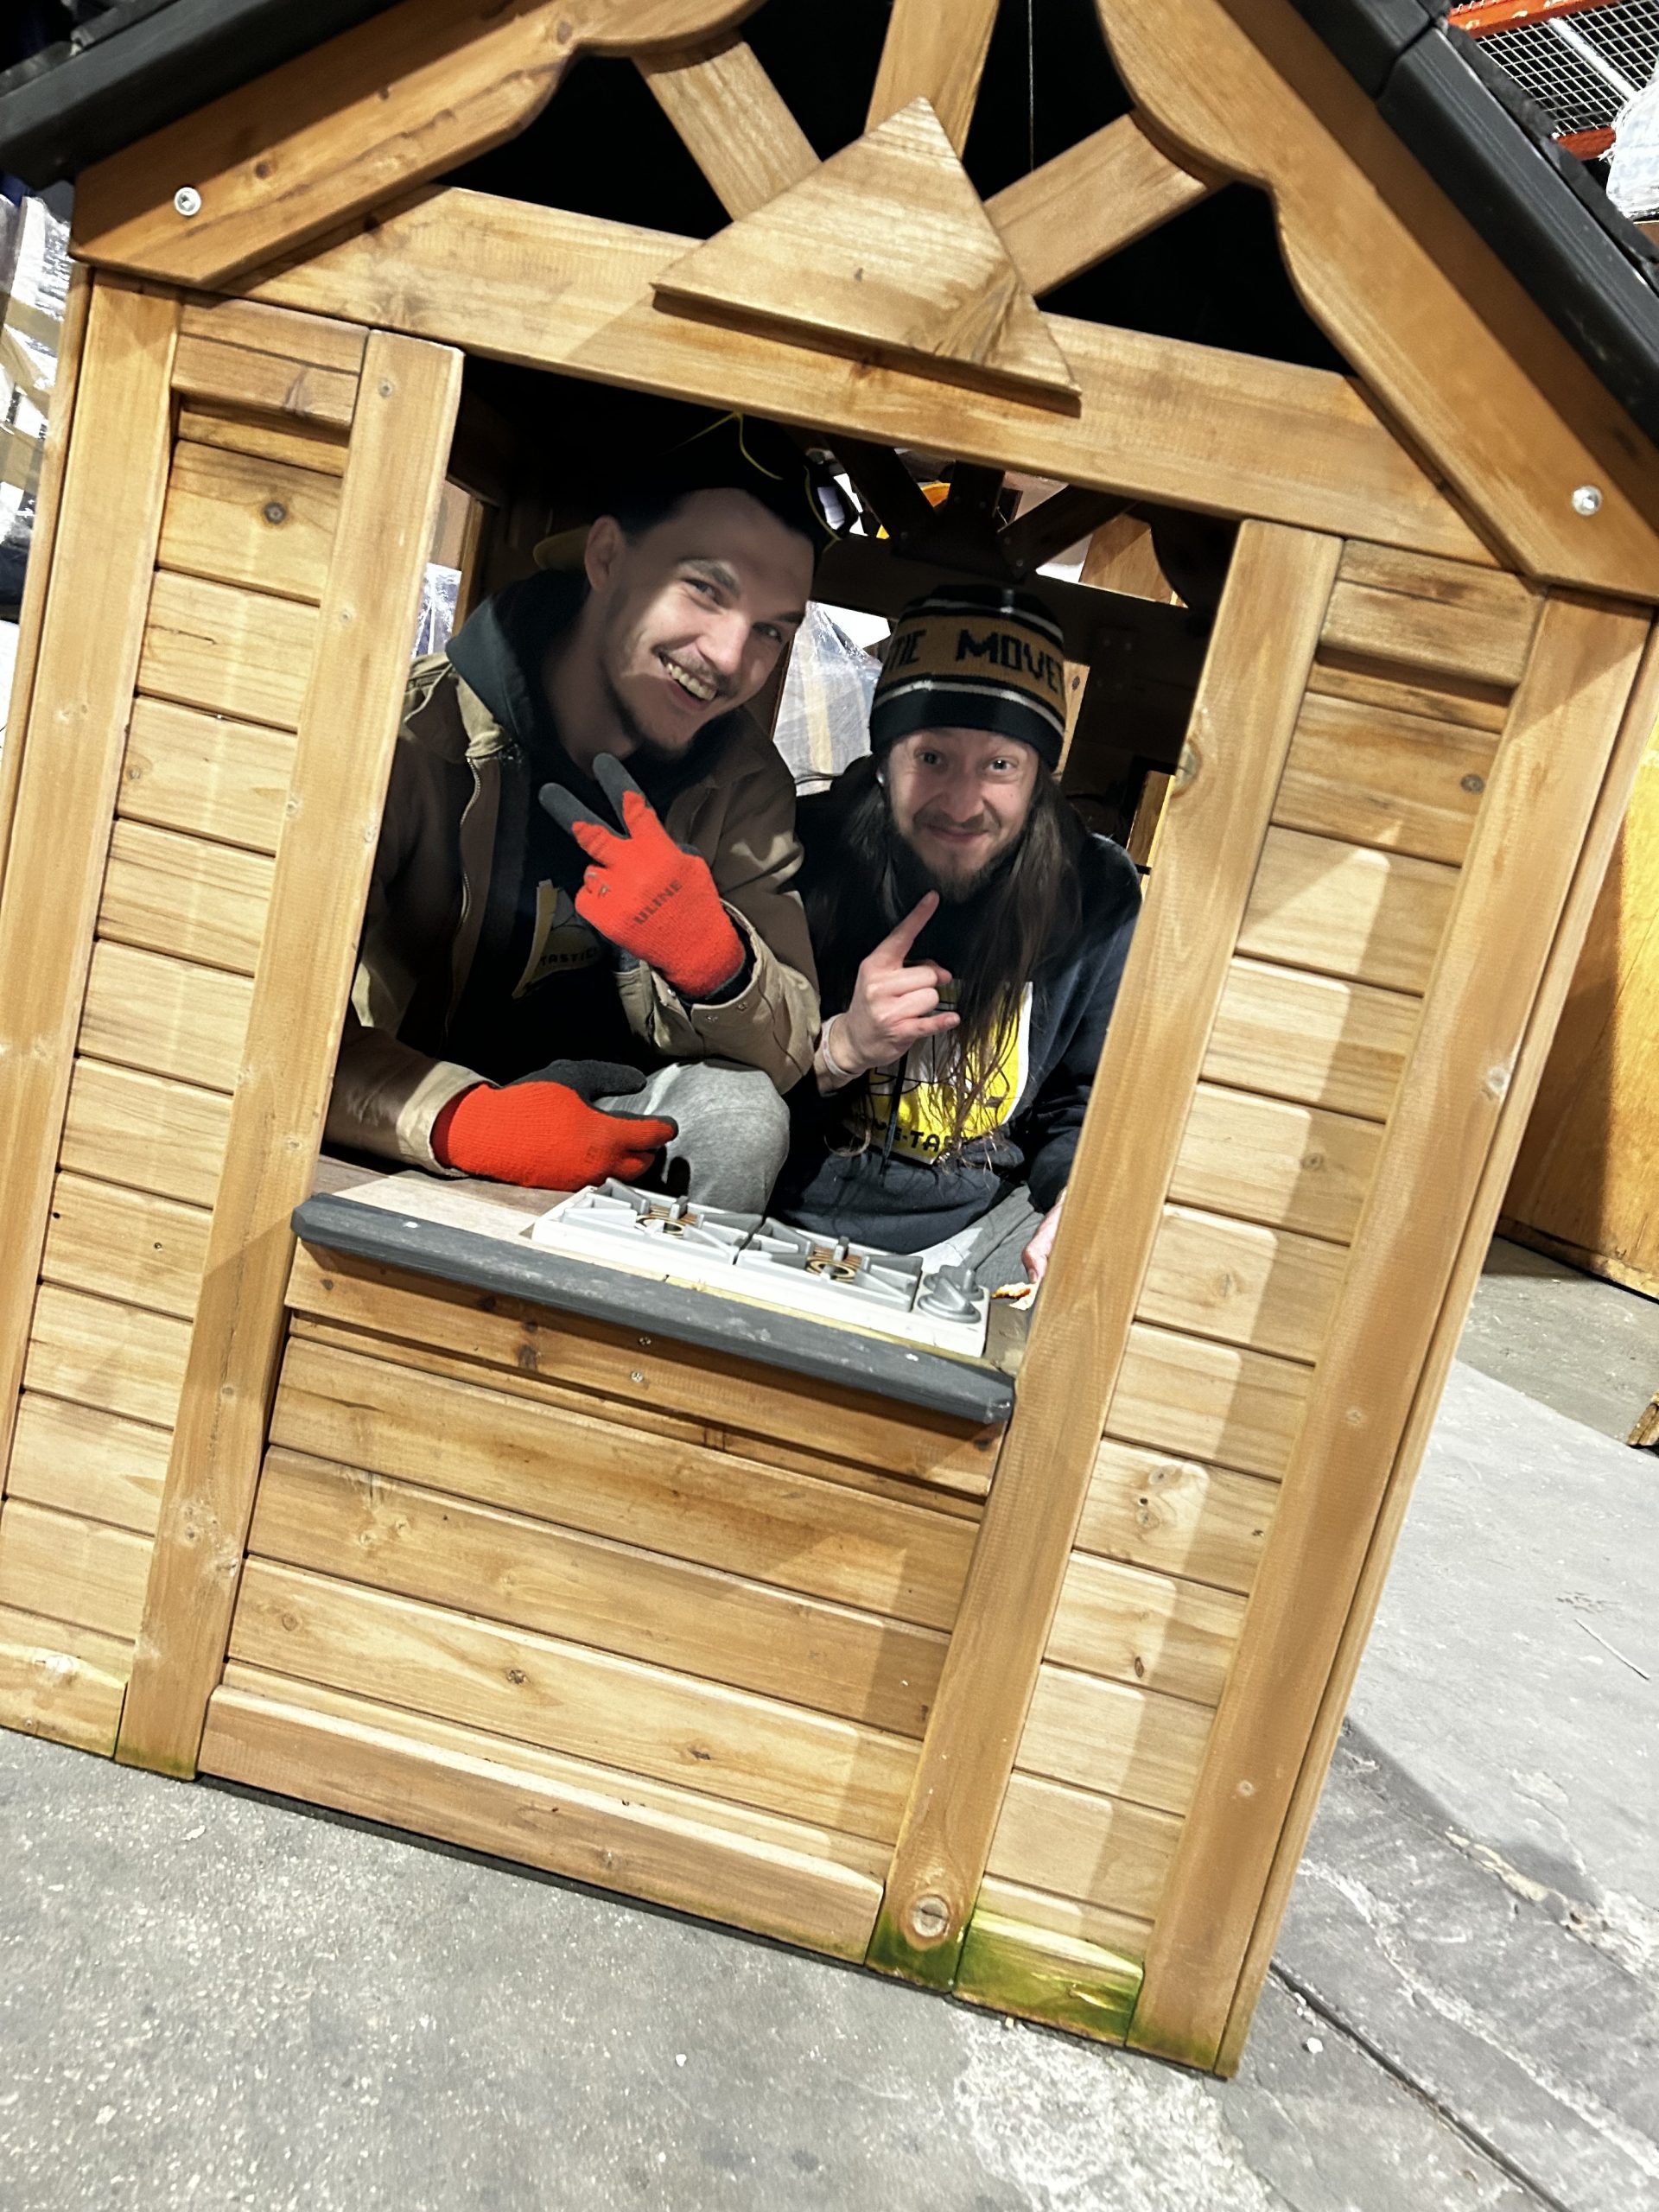 Movers inside a playhouse